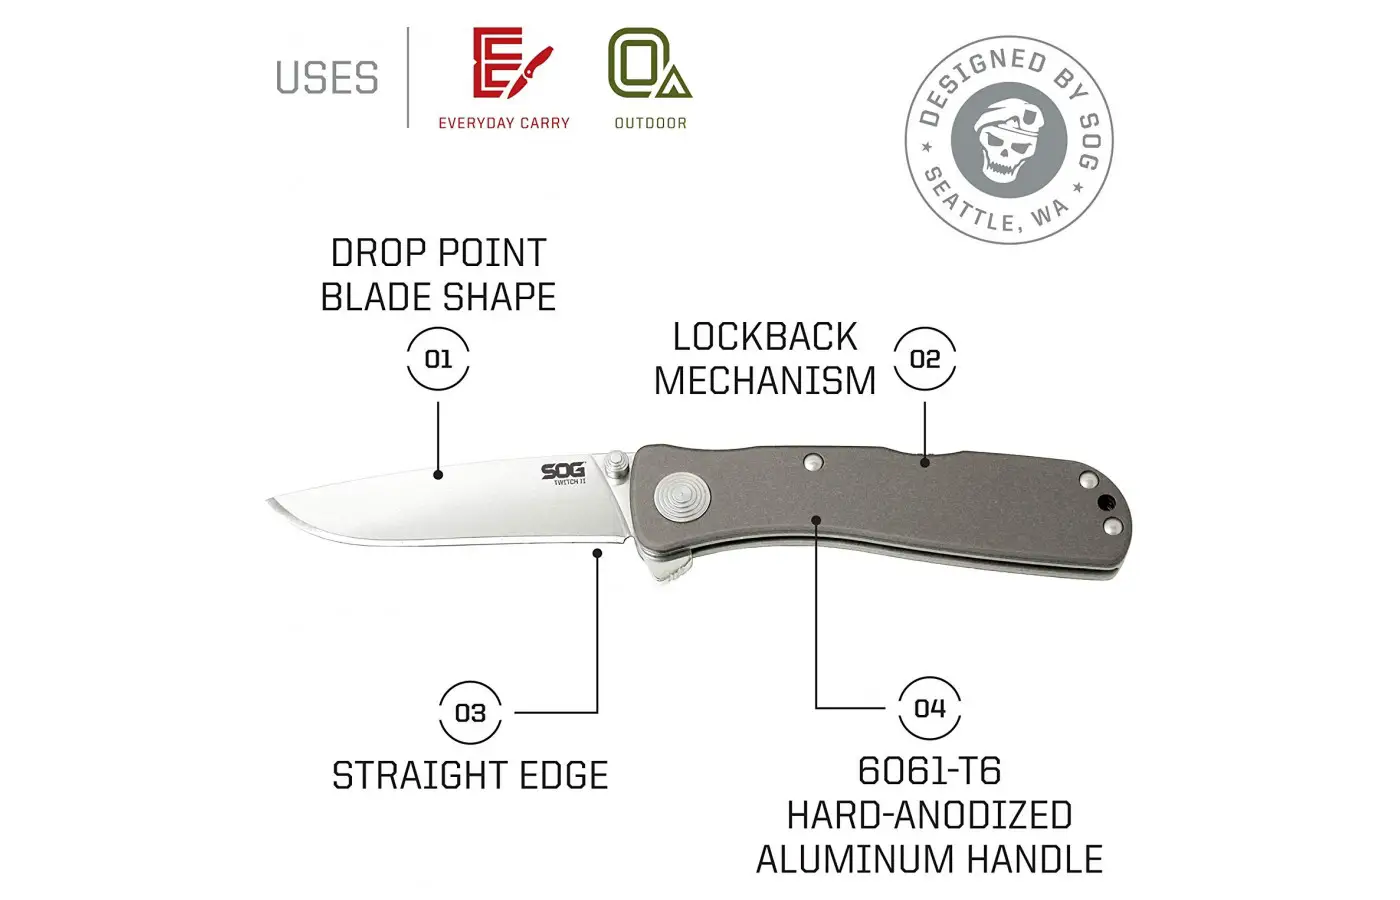 Like every other knife in existence, the purpose of the SOG Twitch II is to cut things